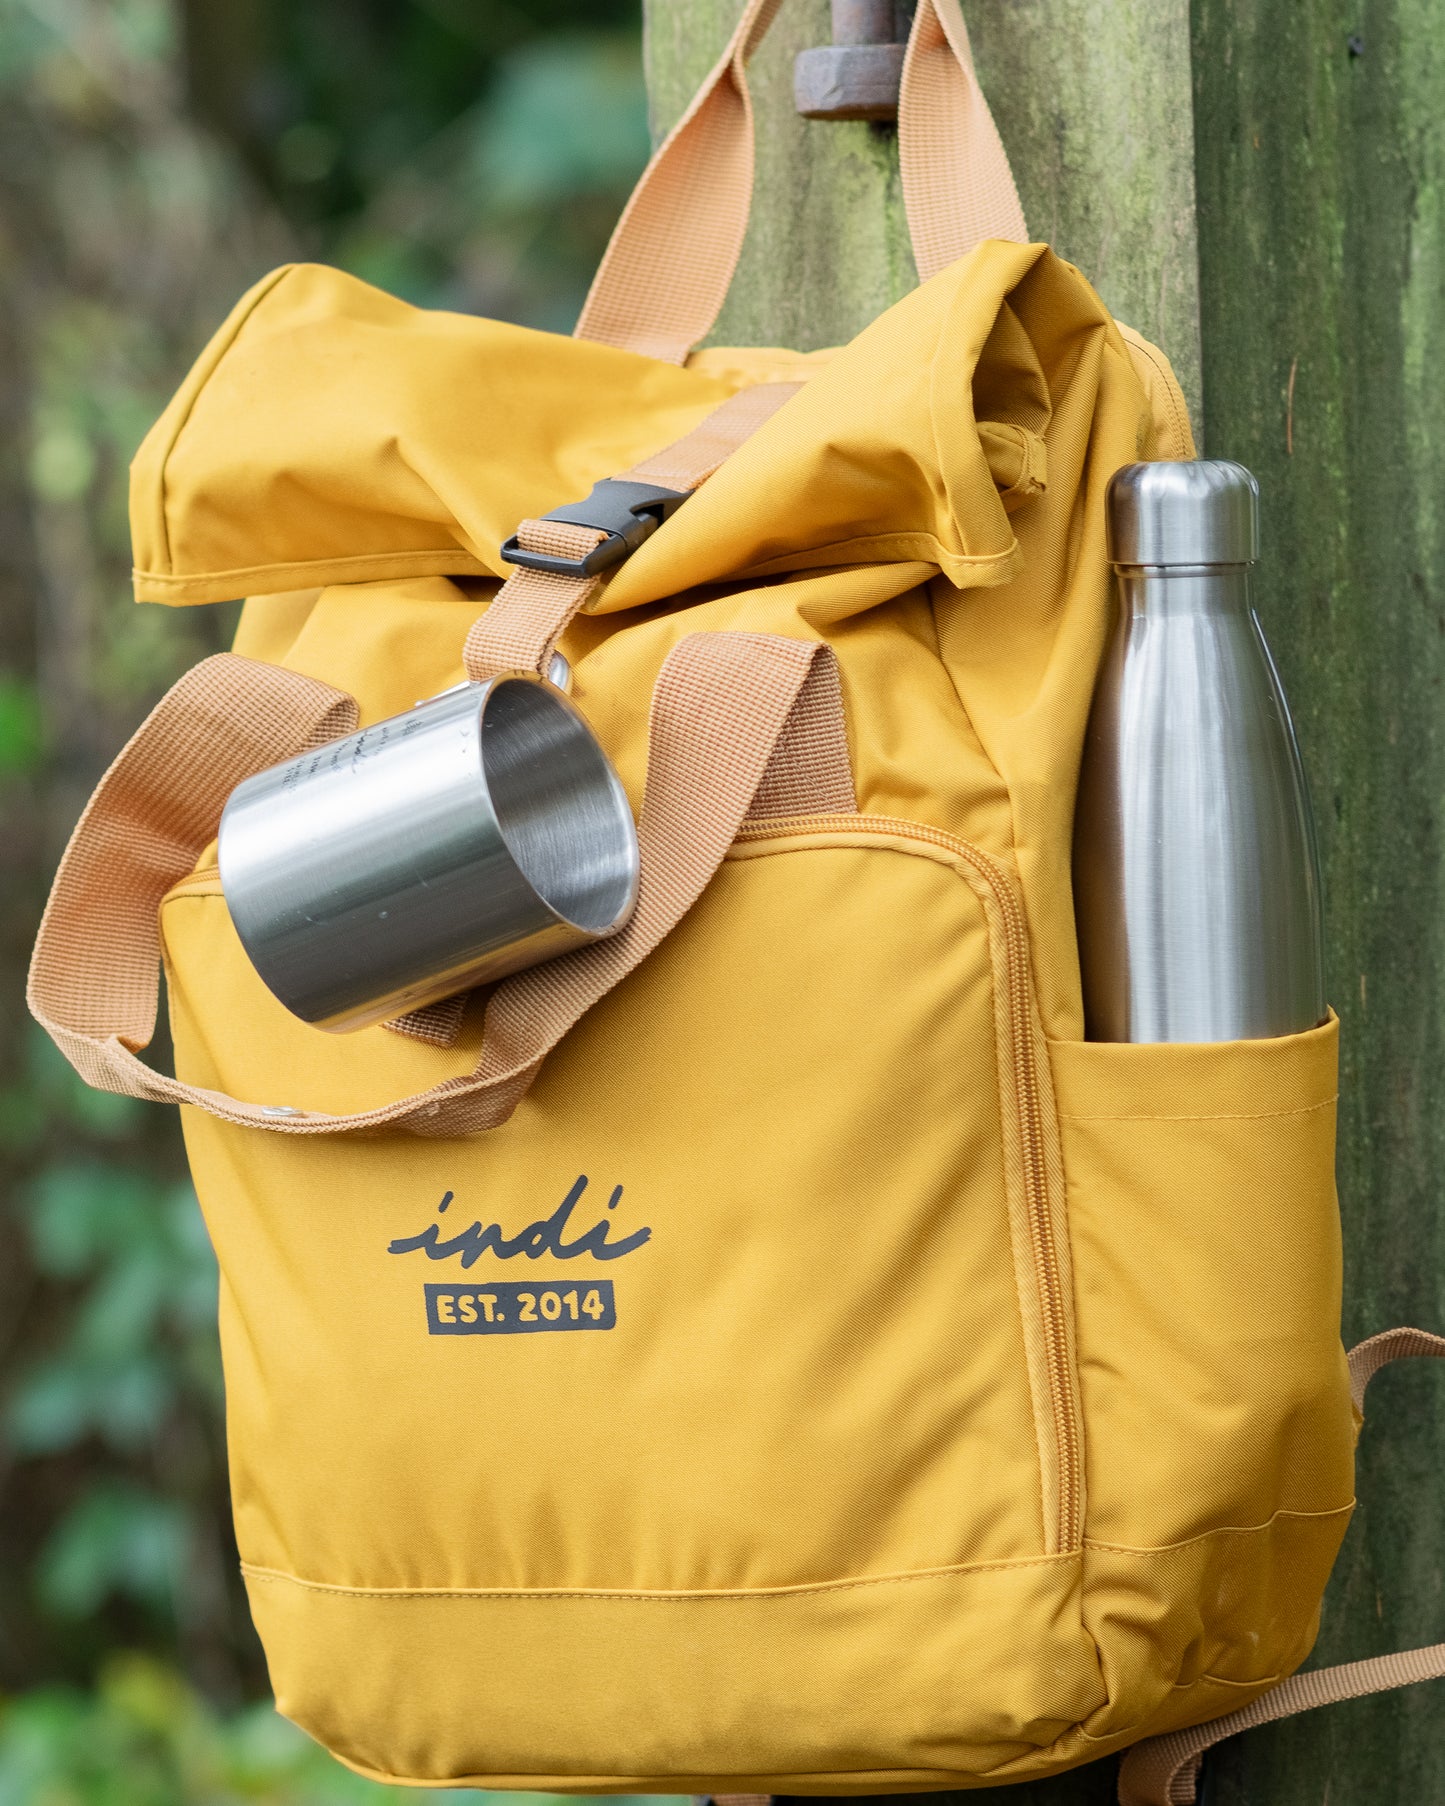 Roll-Top Backpack with Handles in Muted Mustard